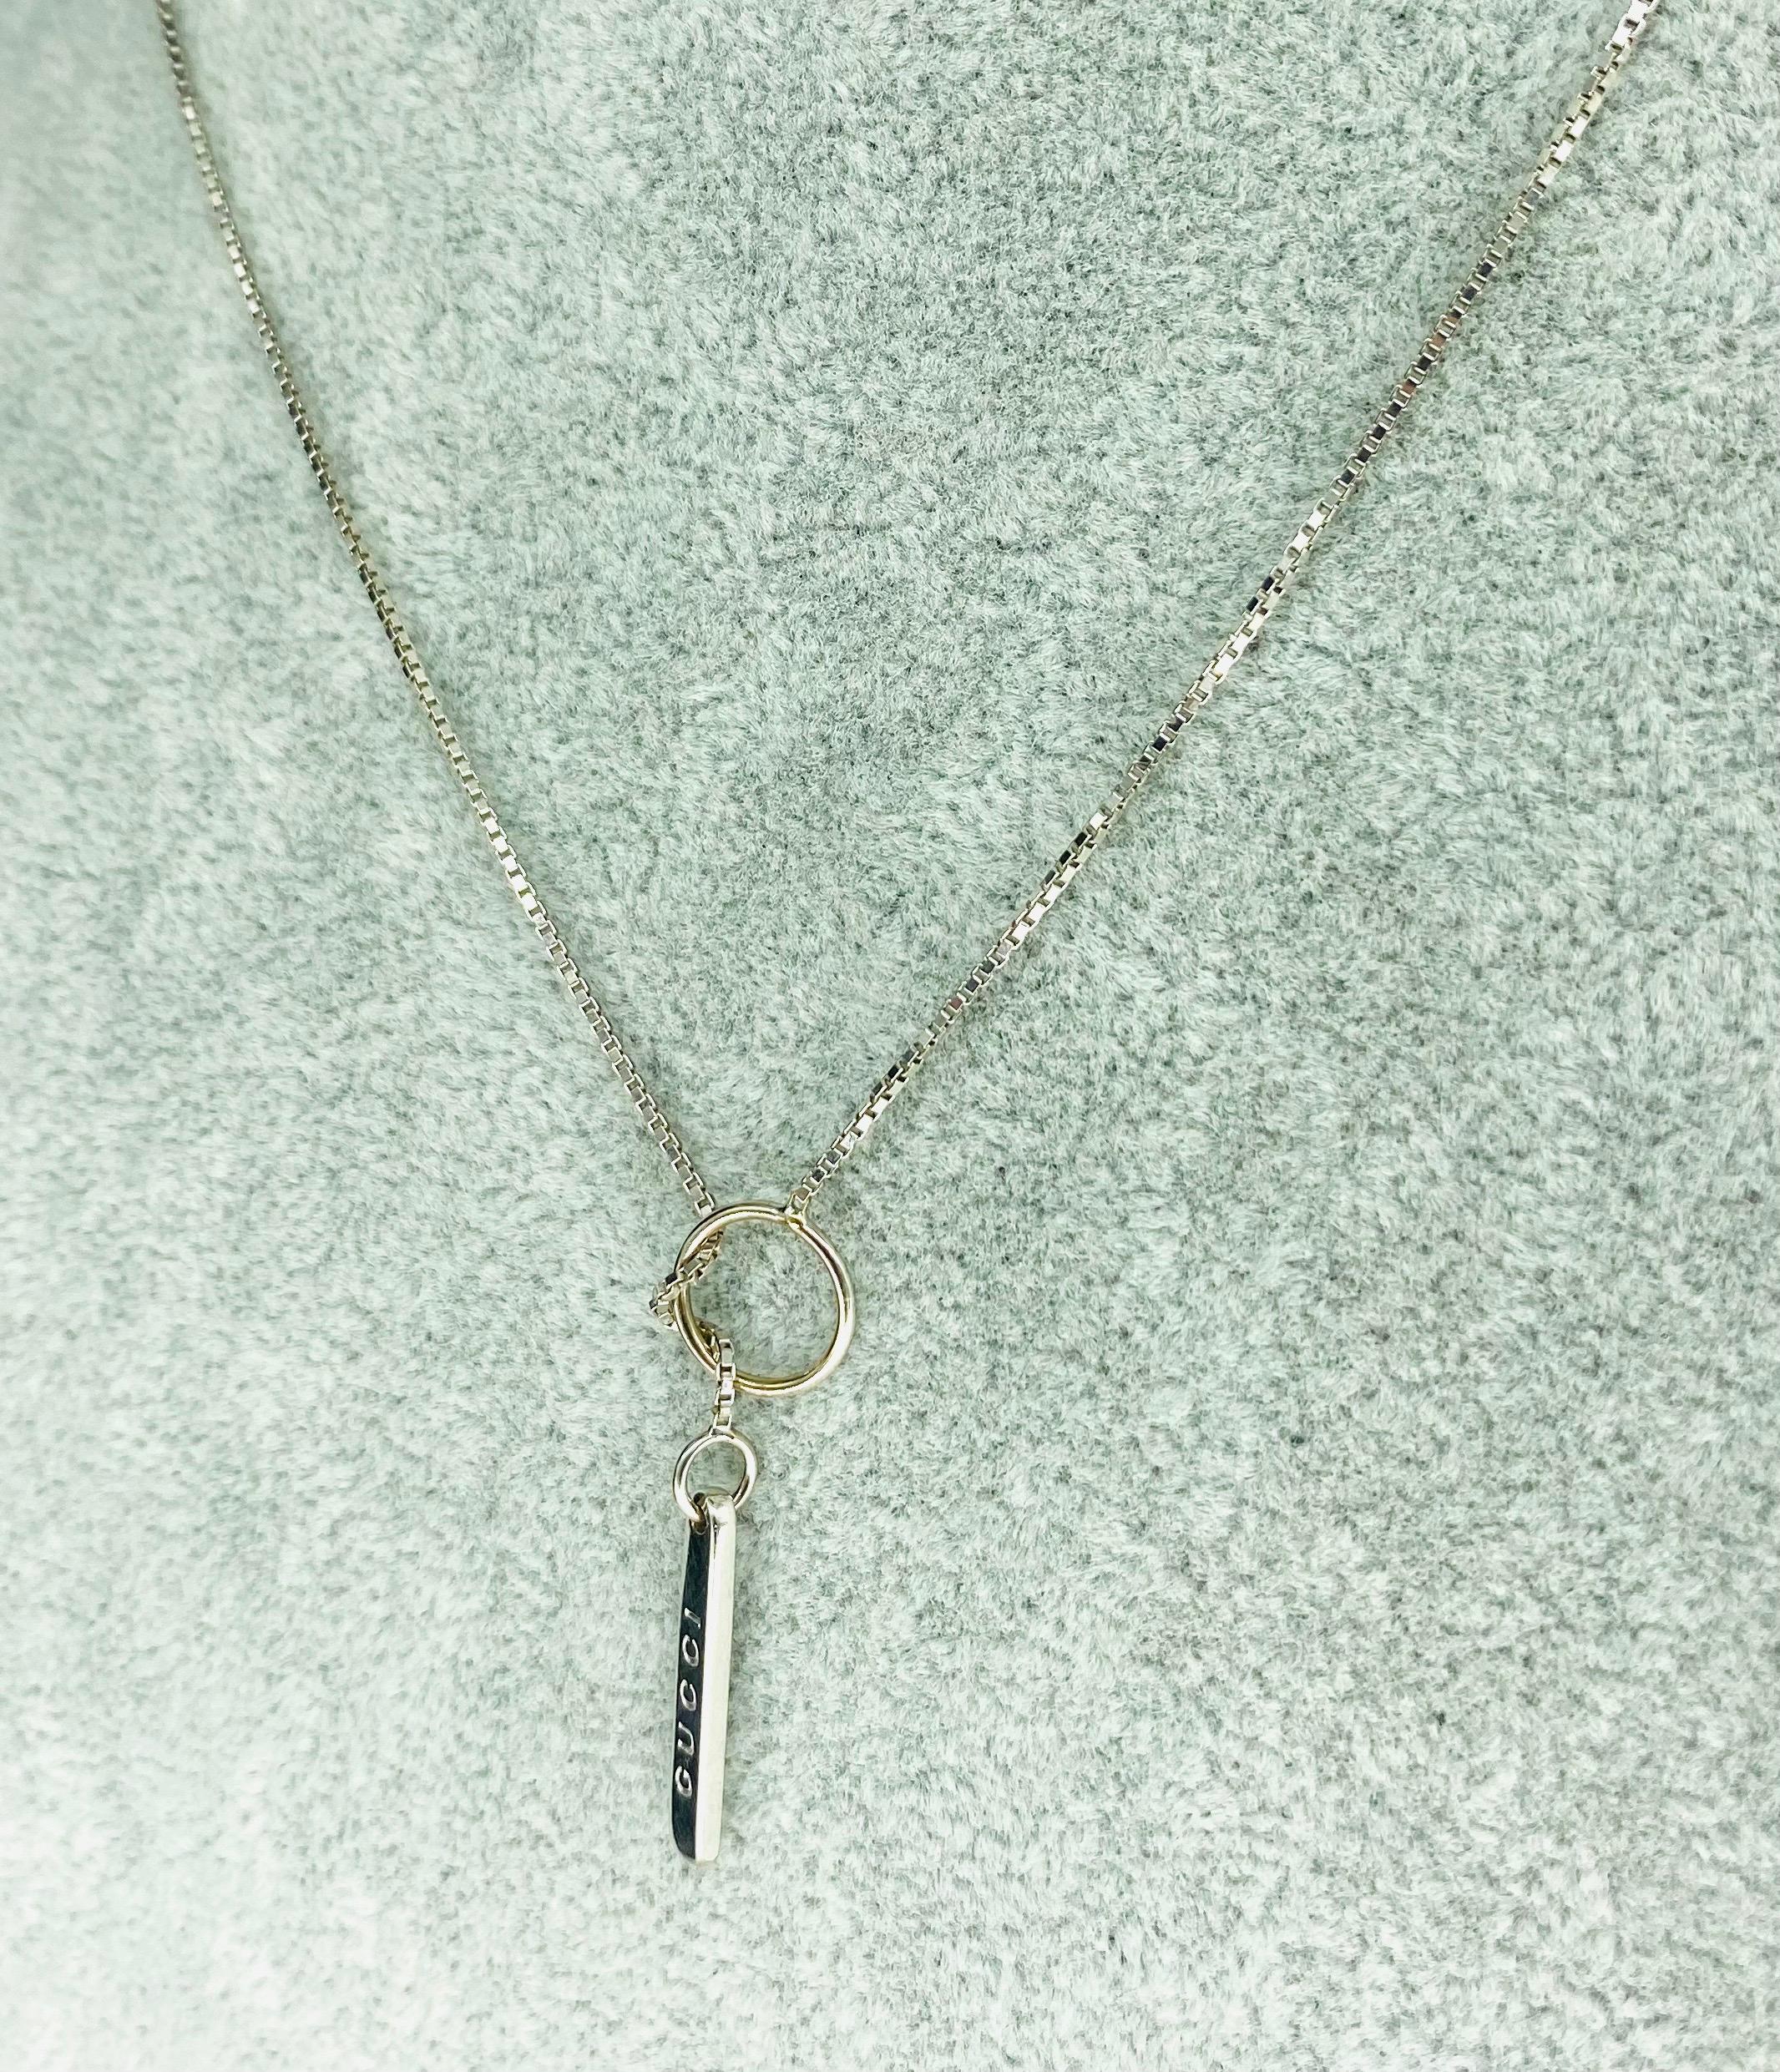 Gucci Drop Necklace 18k White Gold Italy 20 Inch.
The necklace weights 5.3 grams. Please see all photos for markings of the maker.